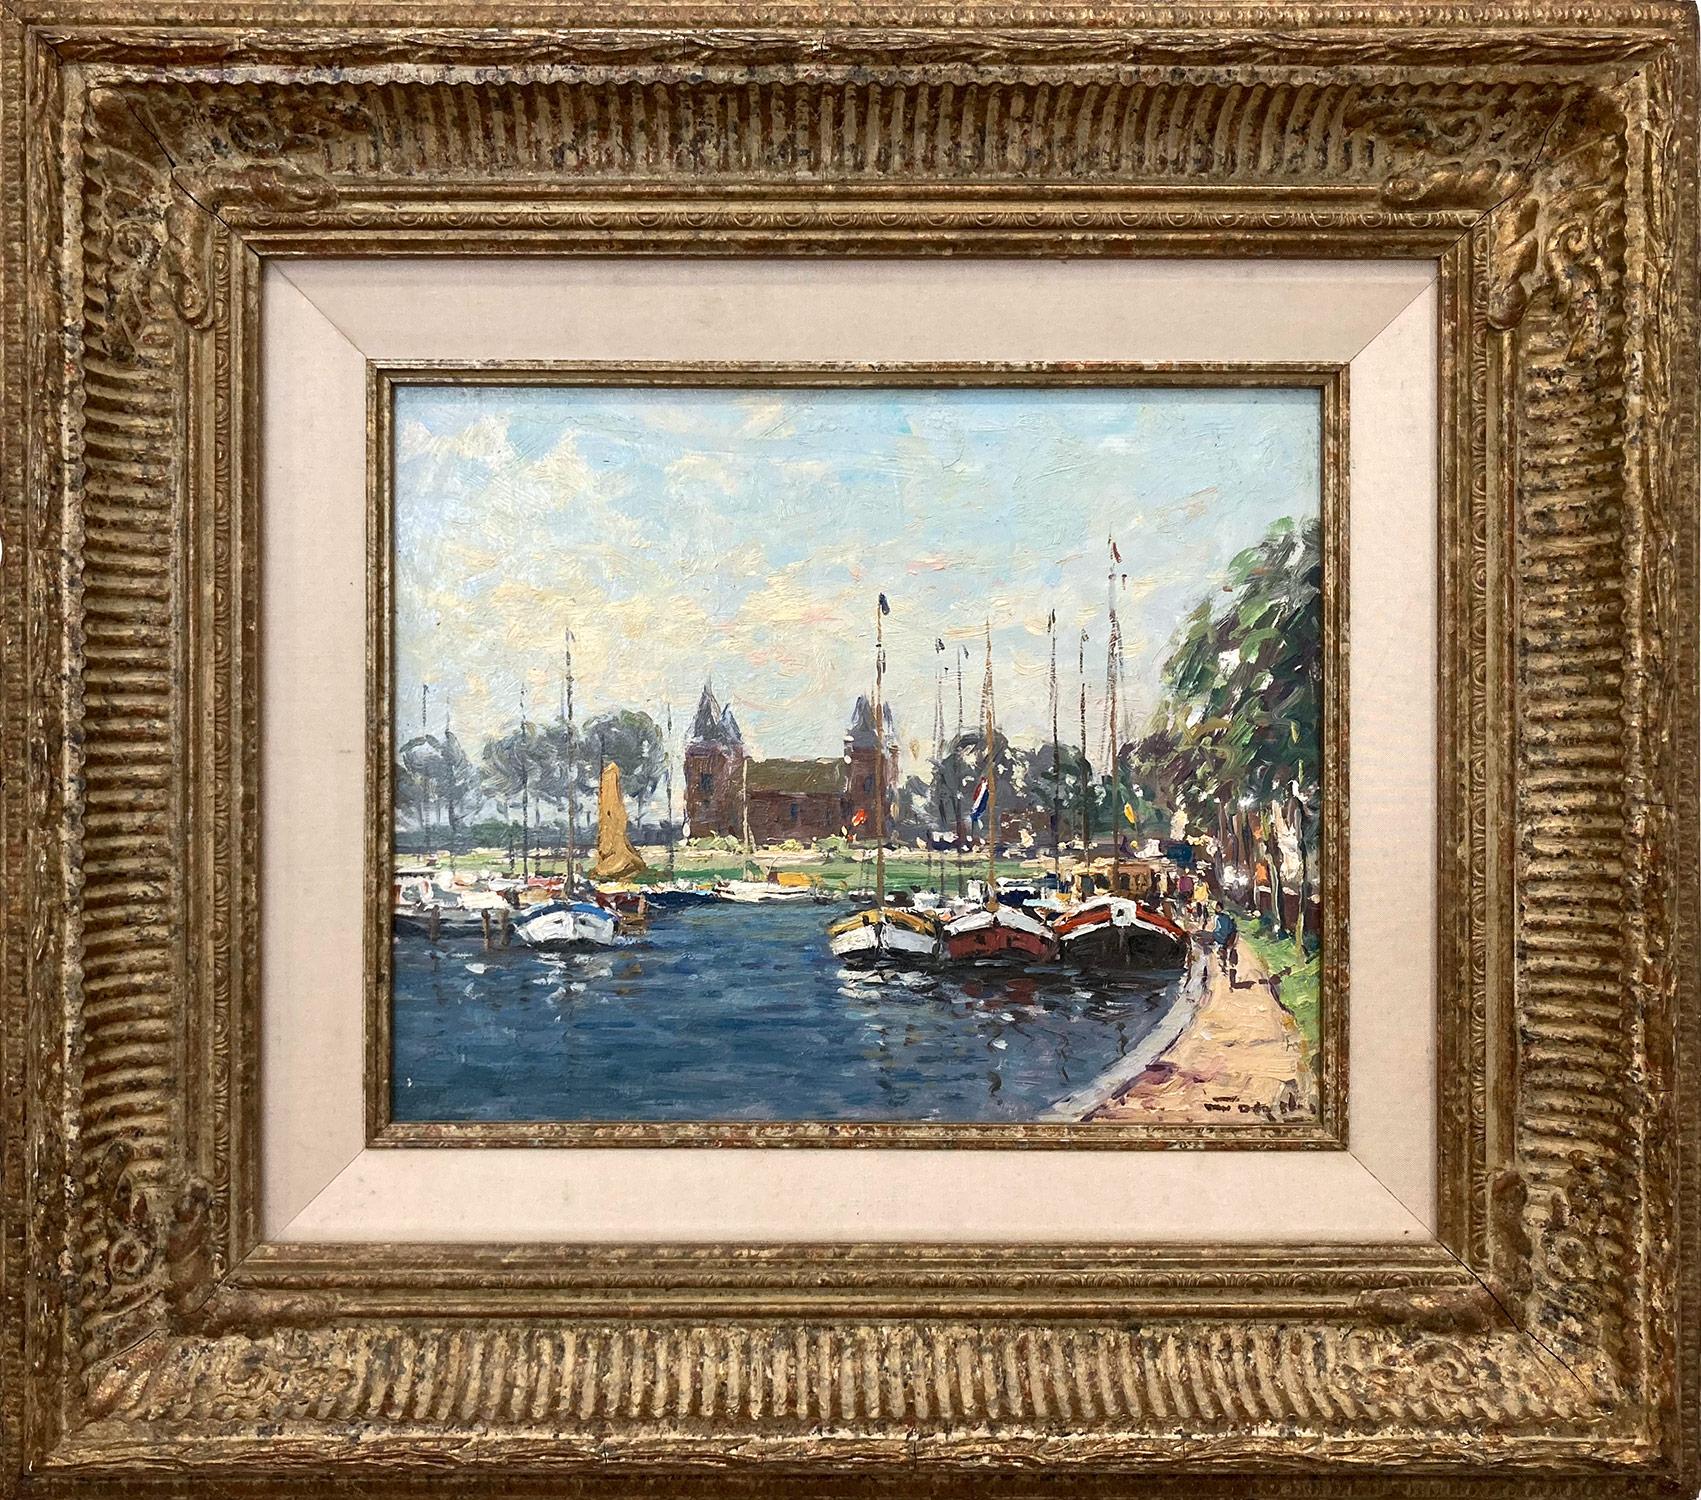 "Haven van Muiden" Impressionist Oil Painting with Figures and Boats at Marina